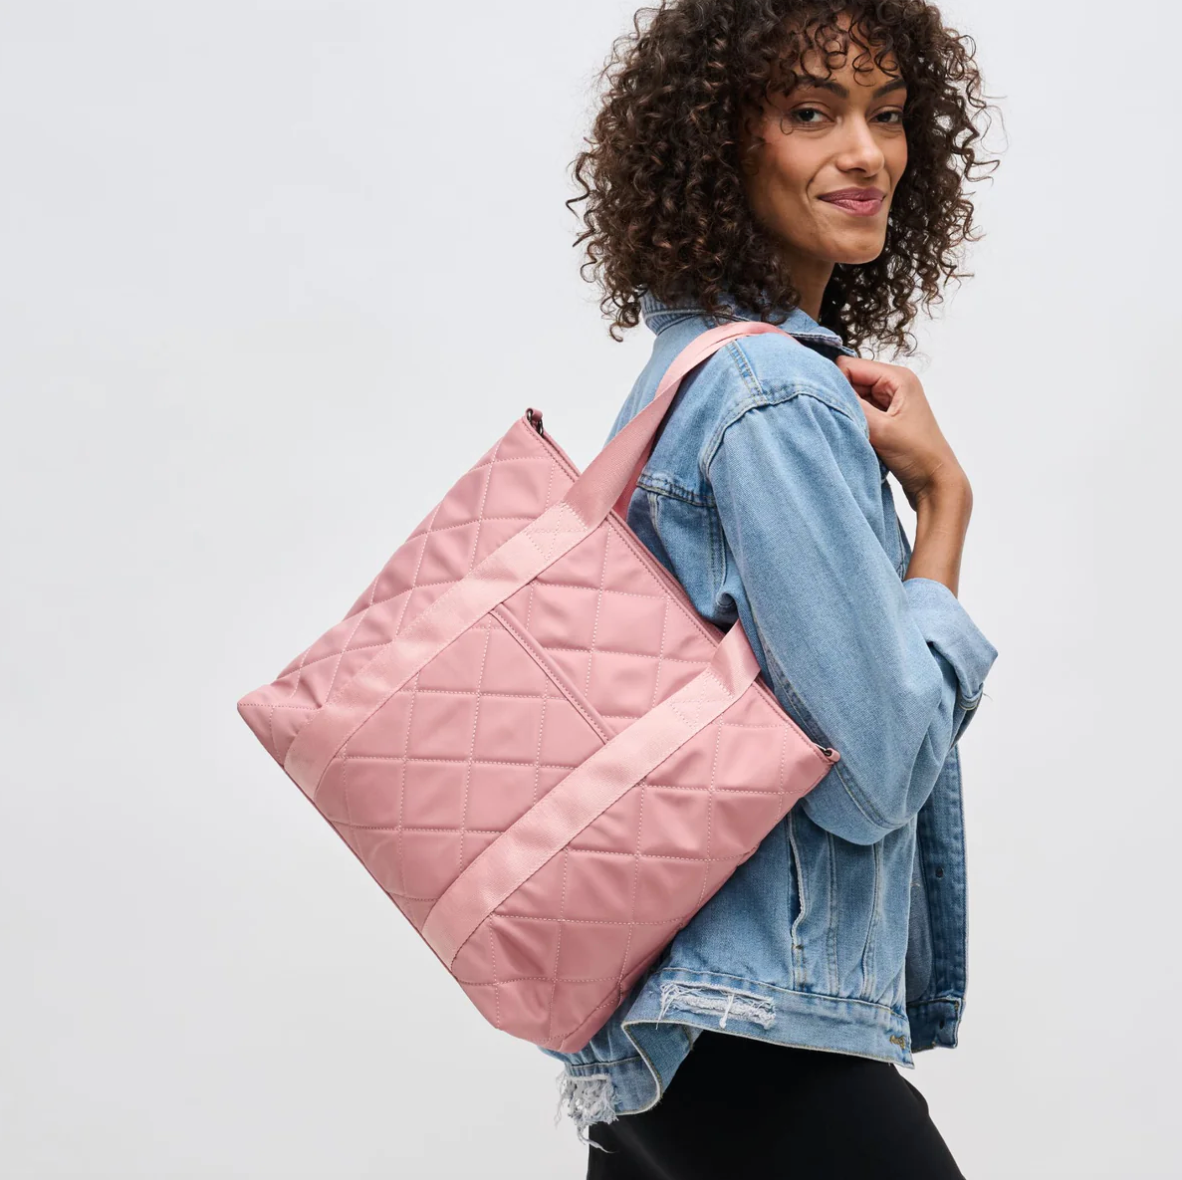 model carrying a pink carryall tote